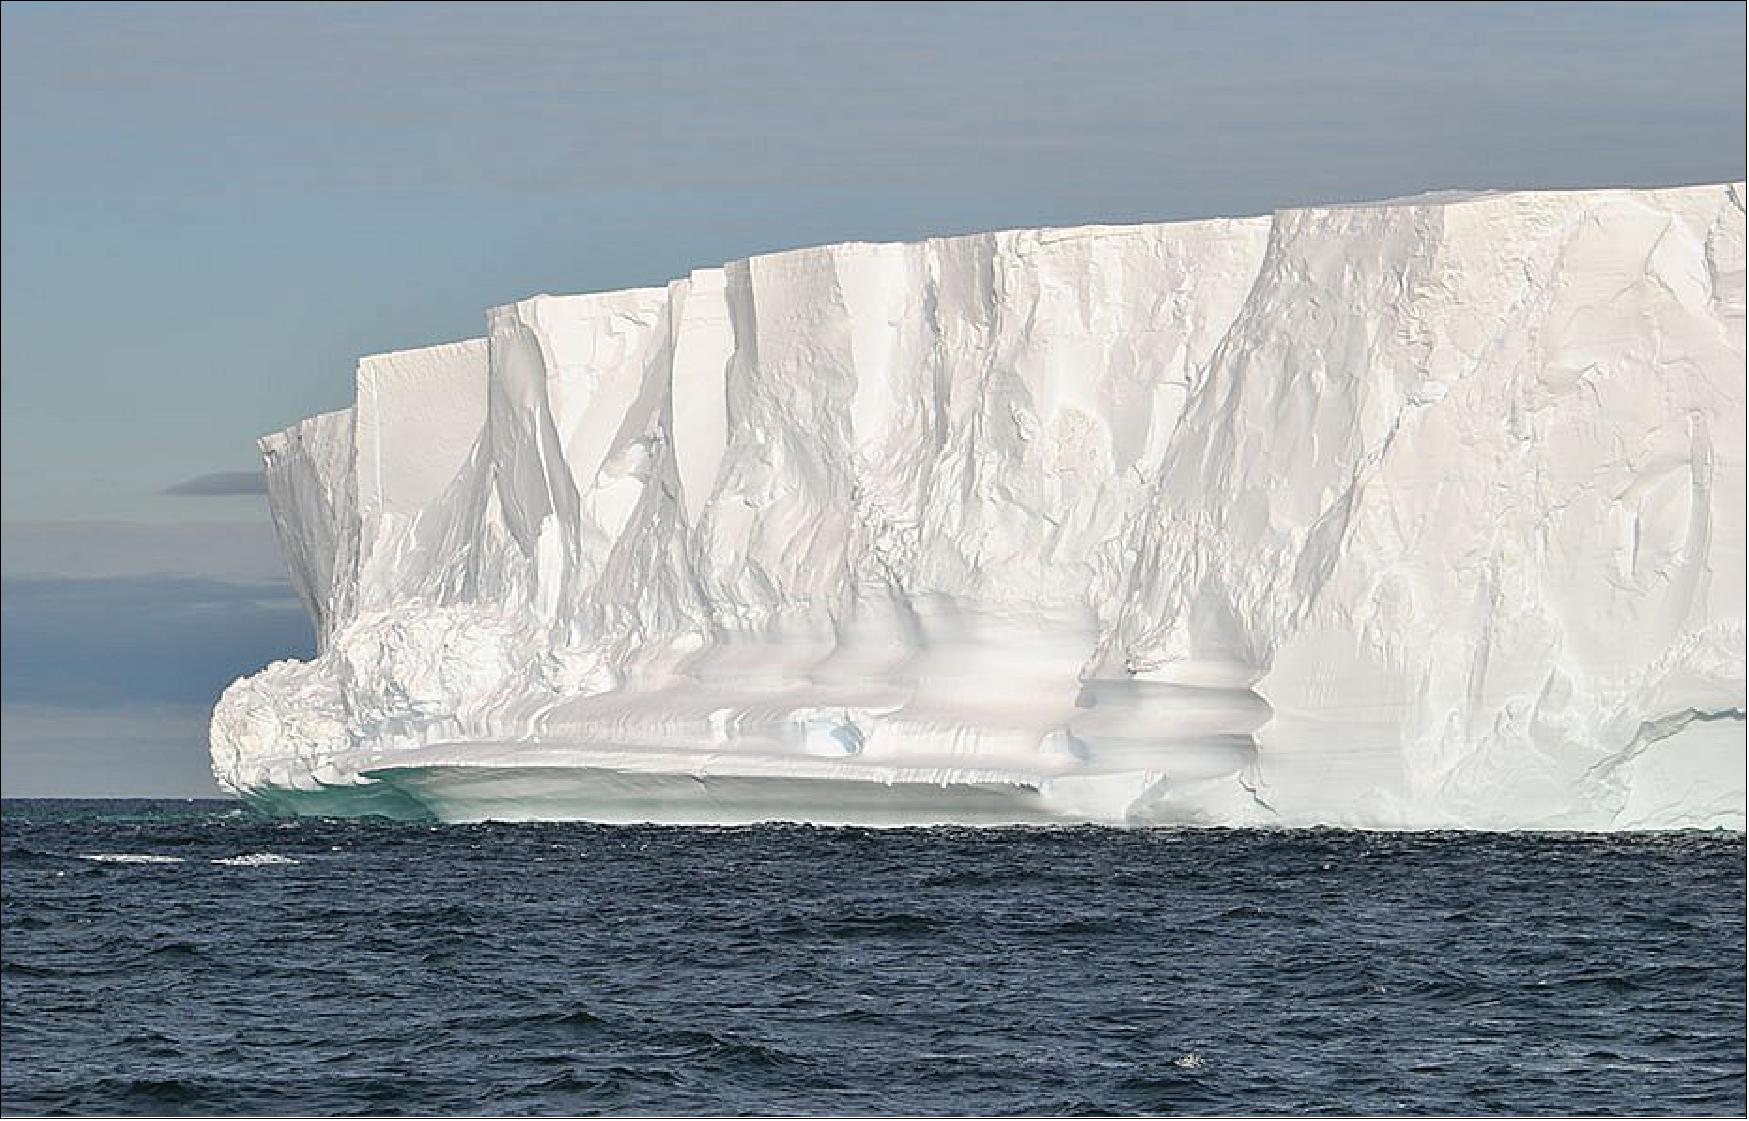 Figure 94: The Getz ice shelf. Inland Antarctic ice contains volumes of water that can raise global sea levels by several meters. A new study published in the journal Nature shows that glacier ice walls are vital for the climate, as they prevent rising ocean temperatures and melting glacier ice (image credit: Anna Wåhlin, University of Gothenburg) 97)